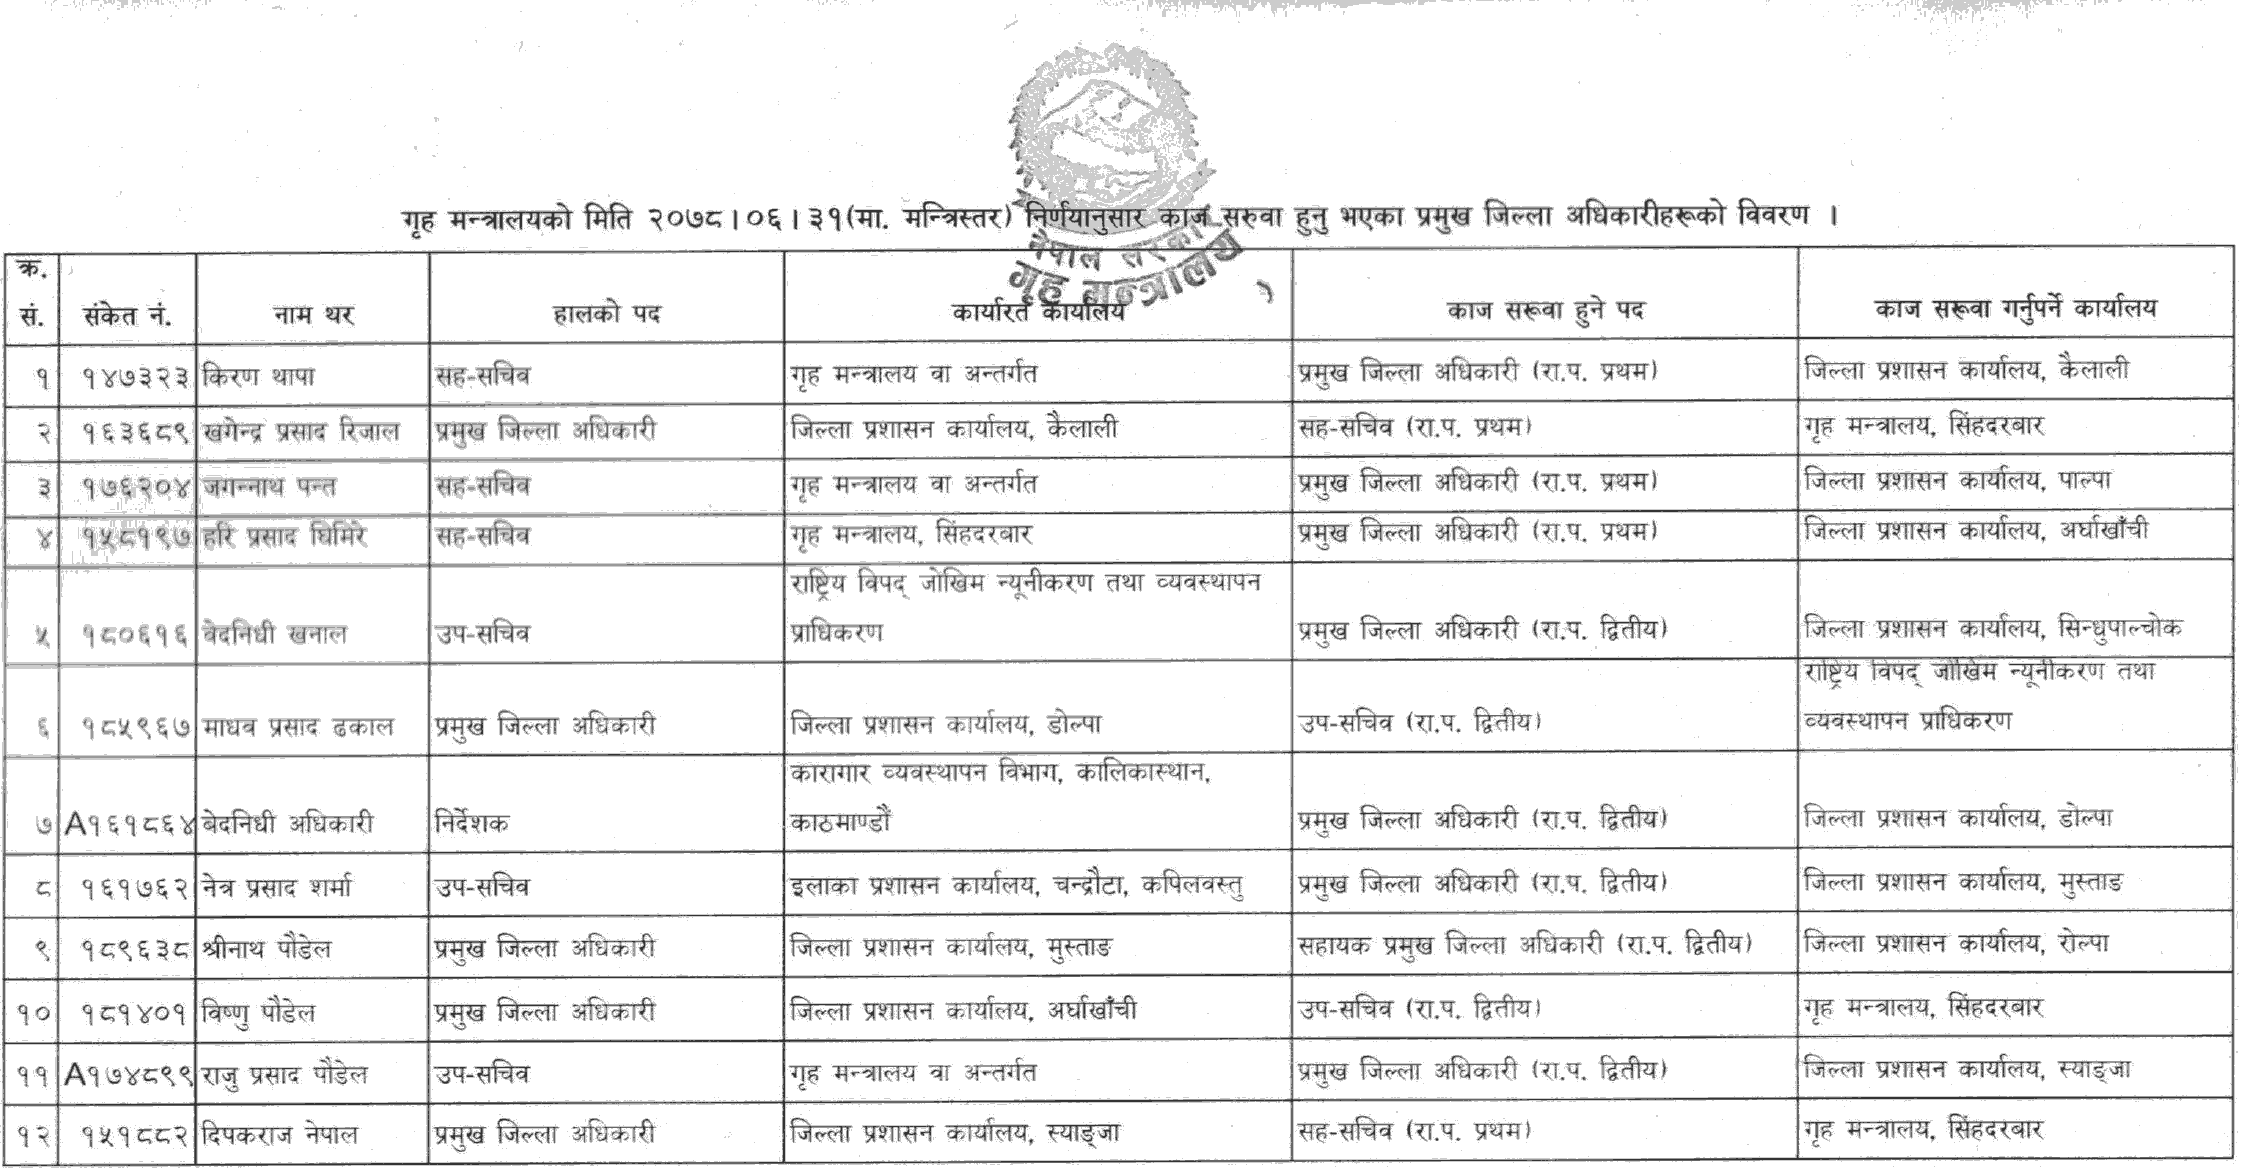 Ministry of Home Affairs Transferred 12 CDOs and Officers